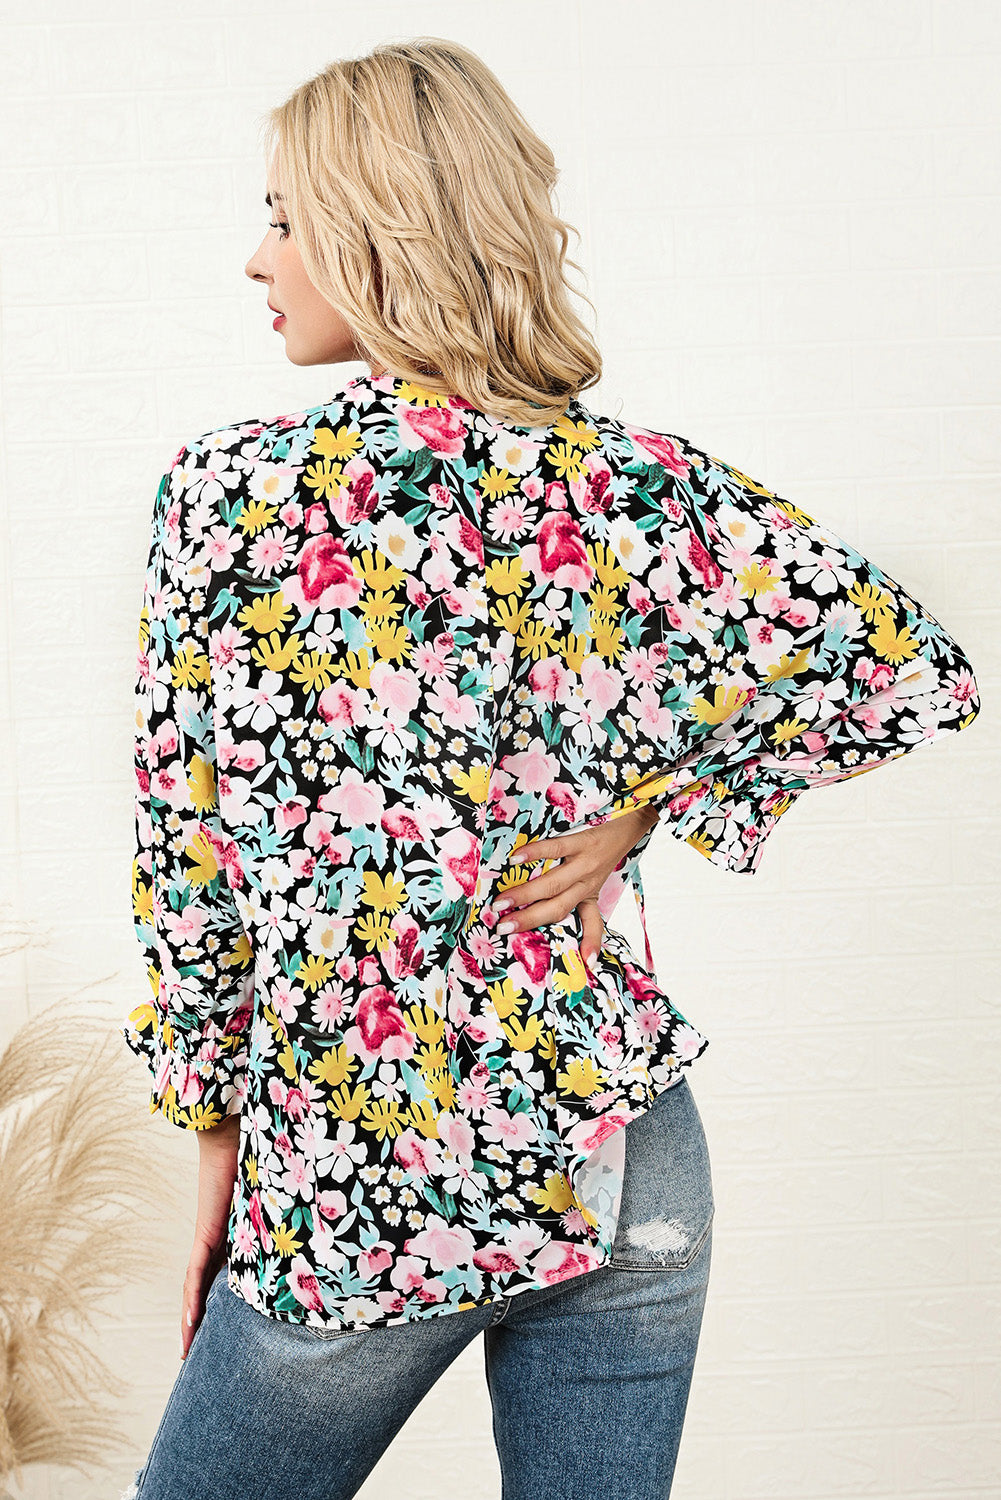 Find Me There Floral Tie Blouse